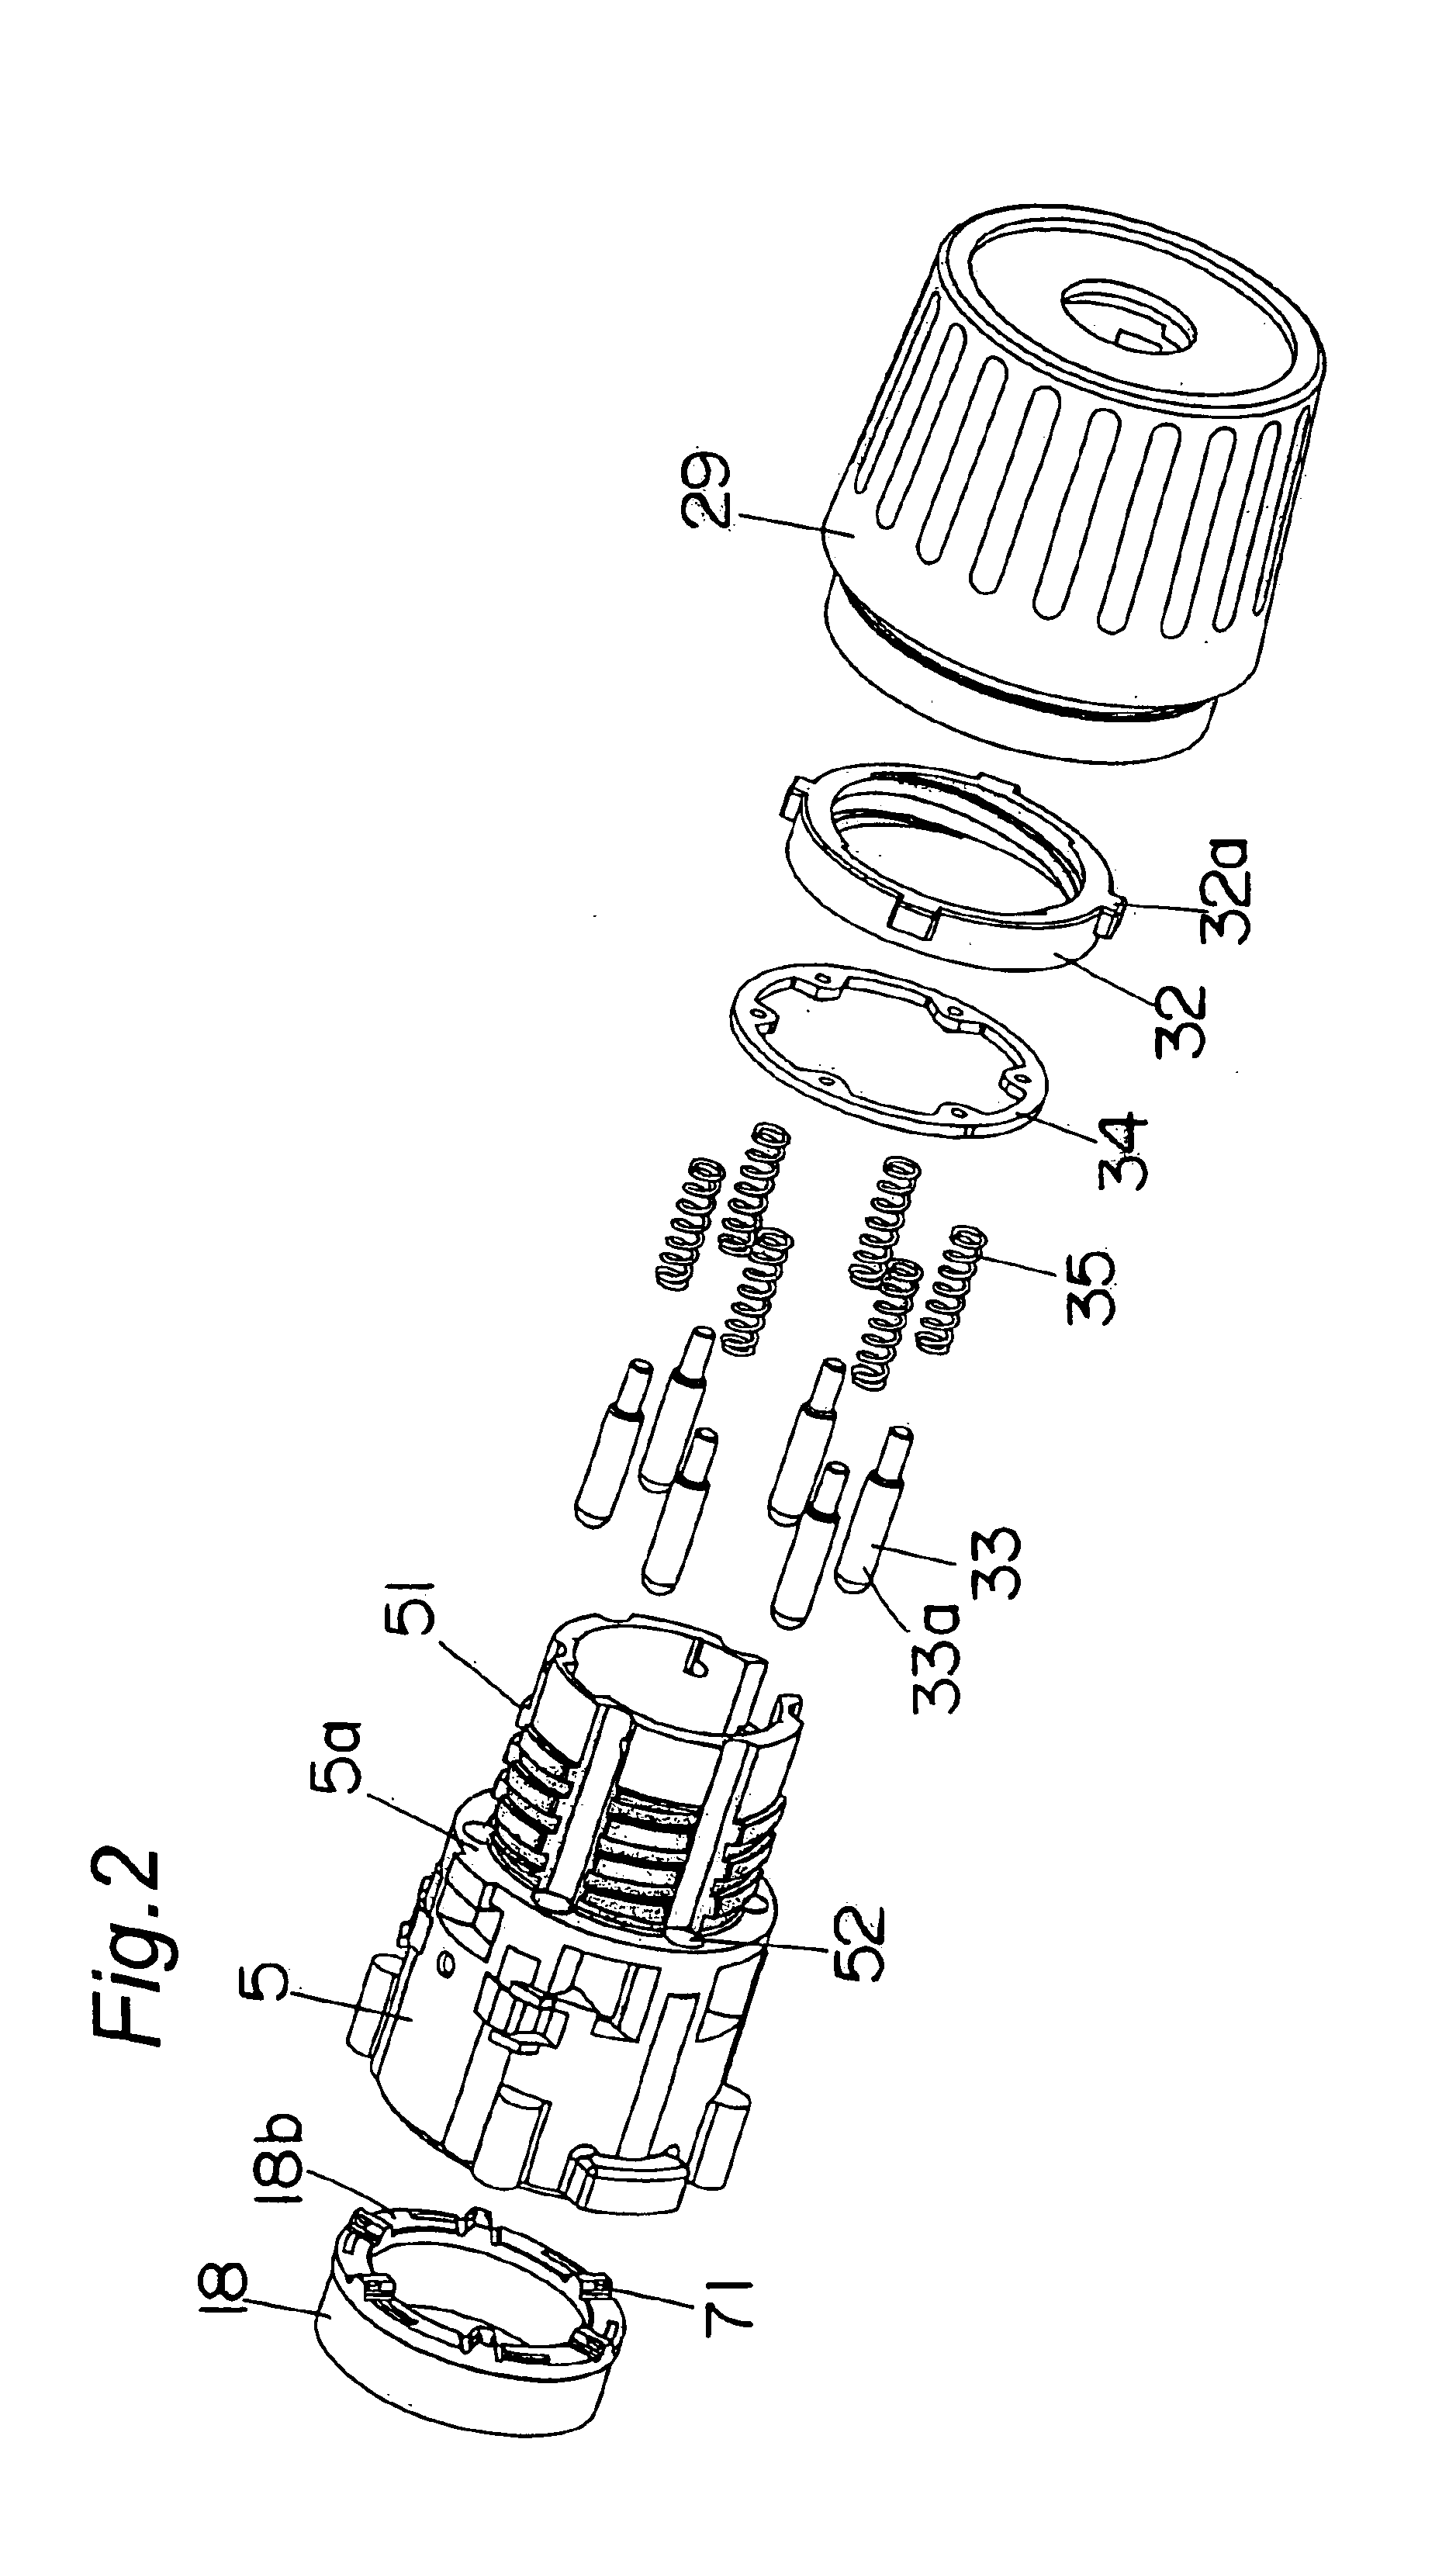 Electrically operated vibrating drill/driver